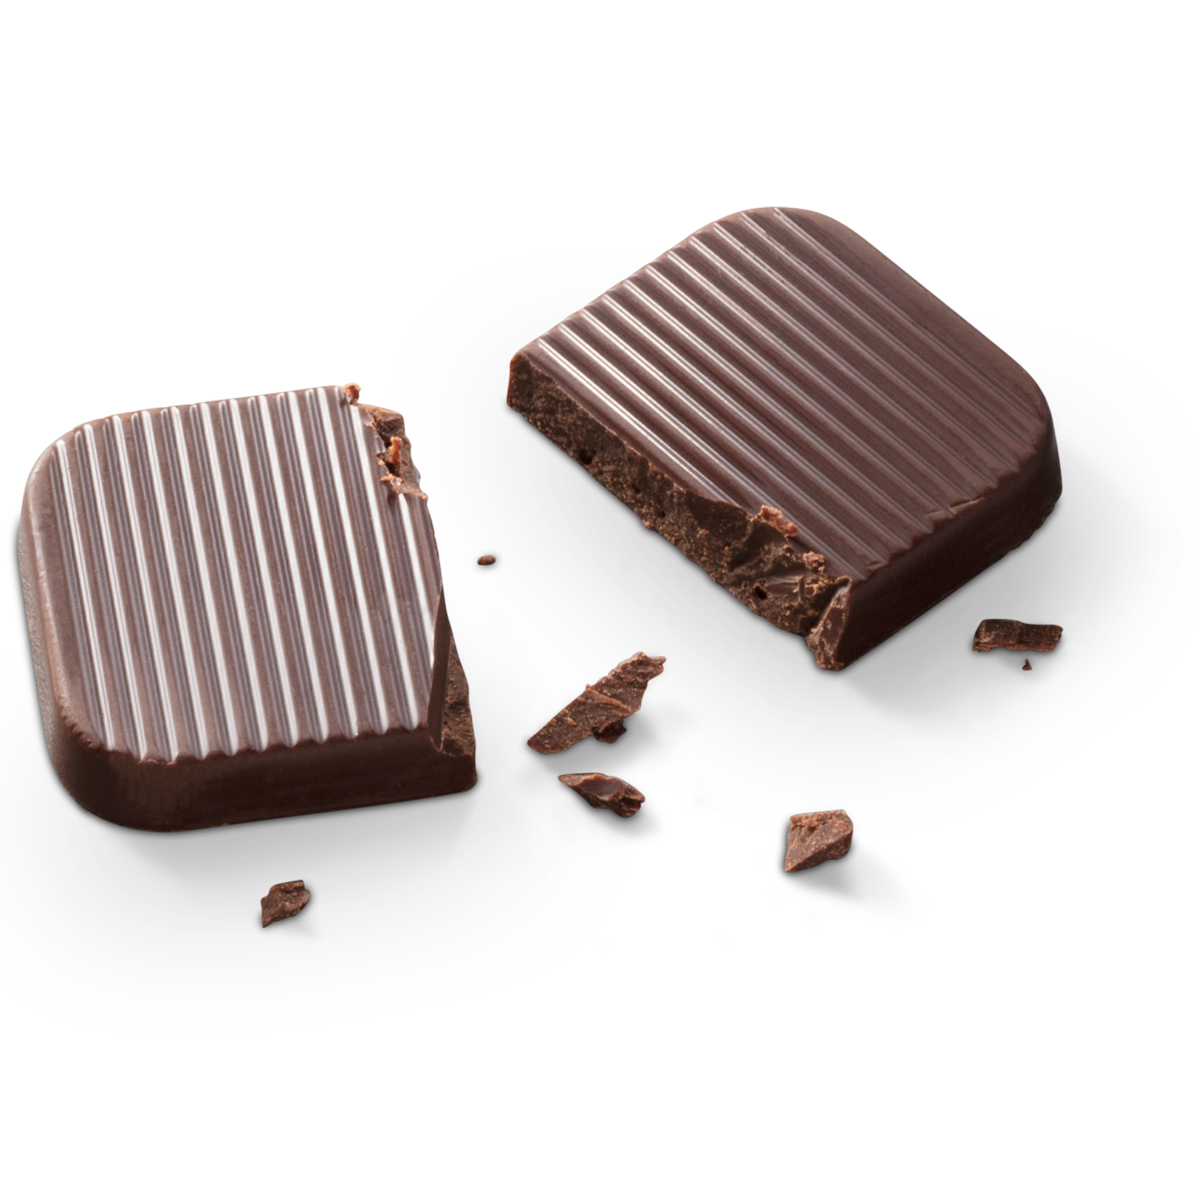 NEW TRIAL SIZE! Belgian Dark Chocolate Napolitains (72% Cacao)